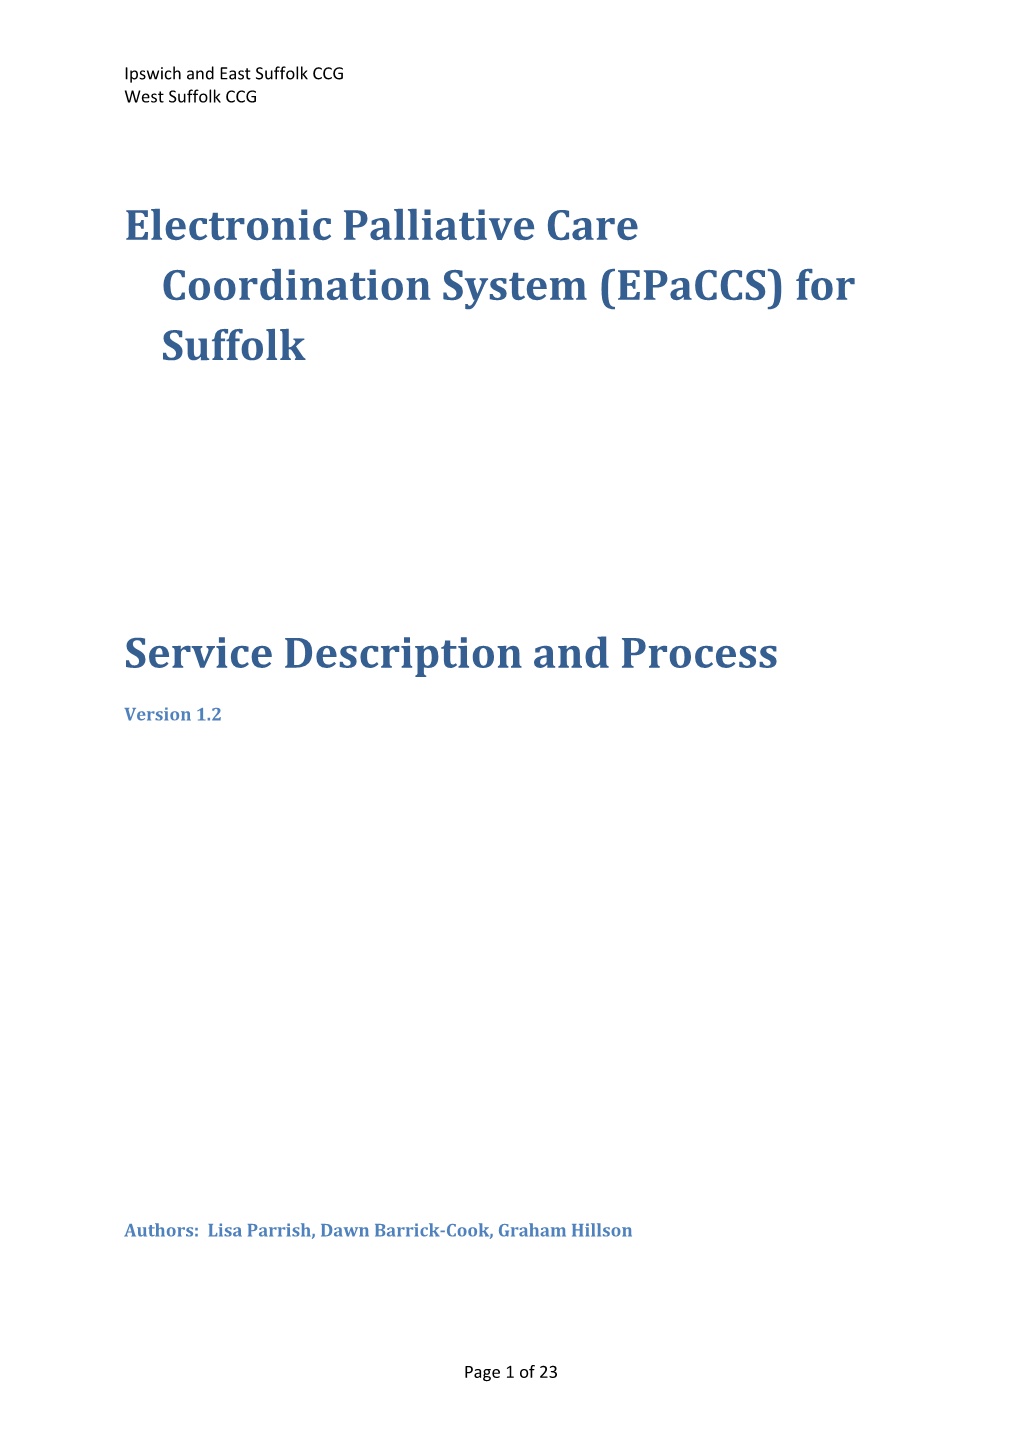 Electronic Palliative Care Coordination System (Epaccs) for Suffolk